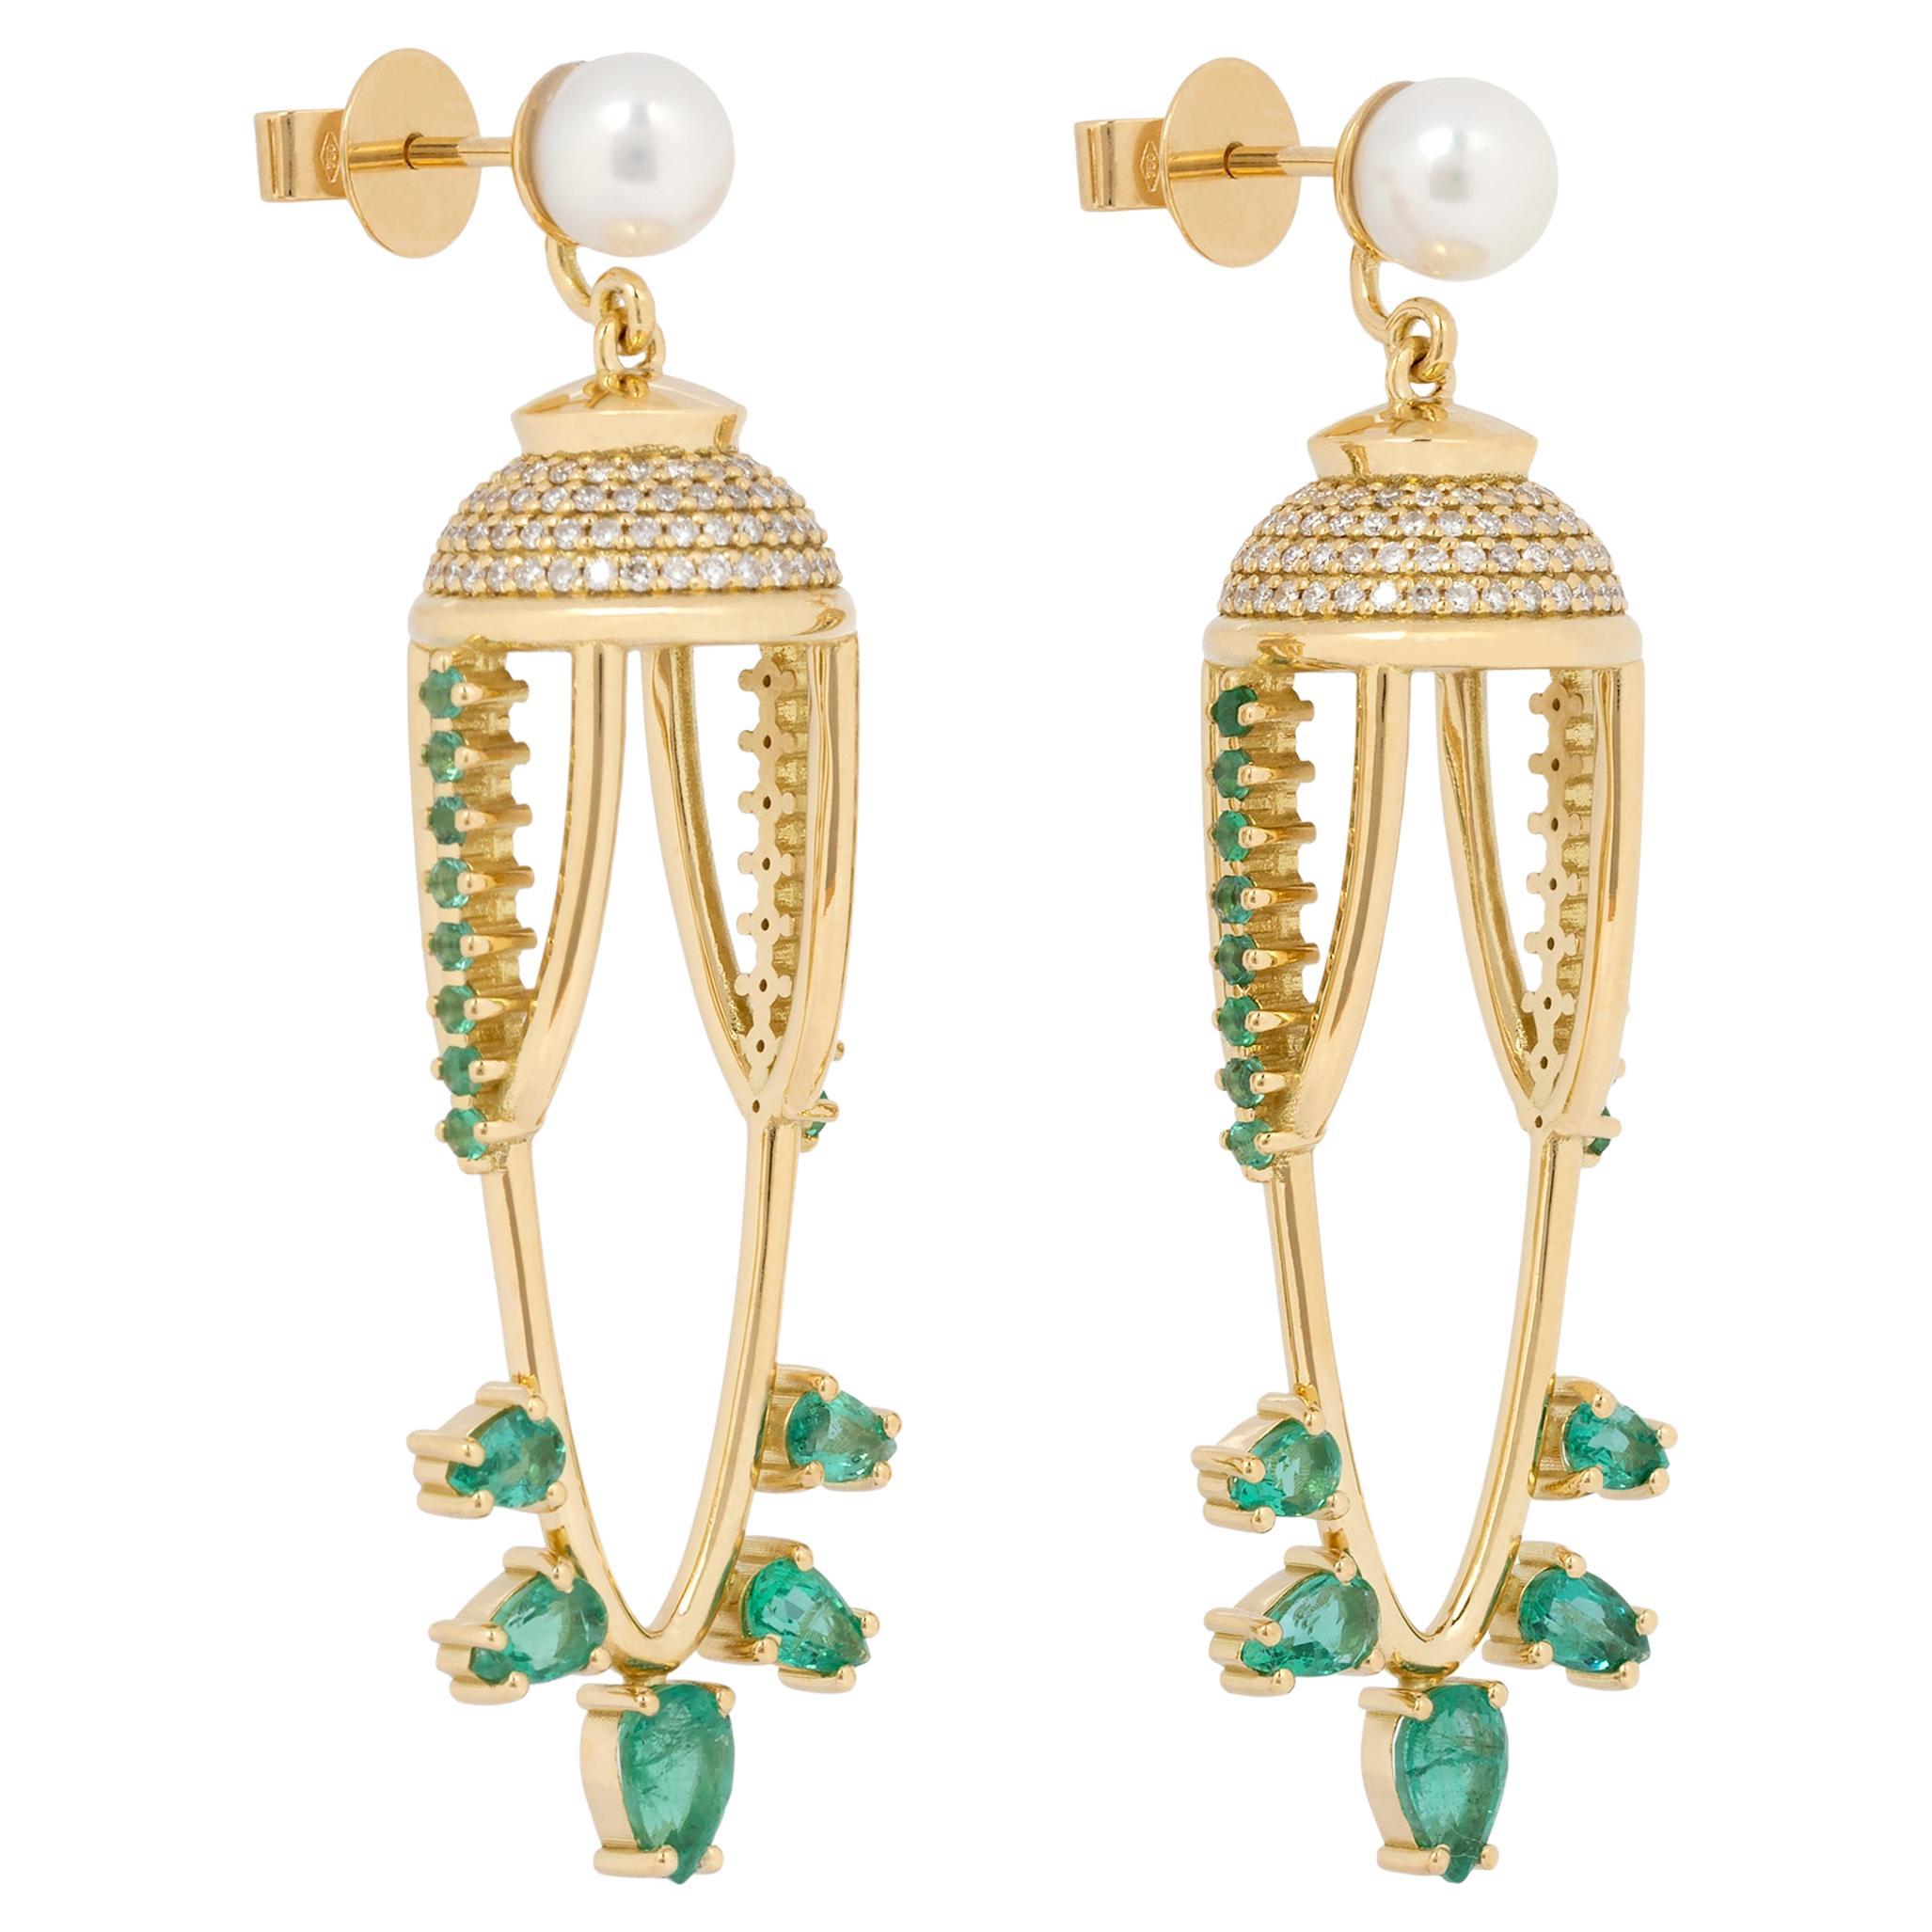 Abundance Earrings in 18 Karat Gold with Diamonds, Emeralds And Pearls